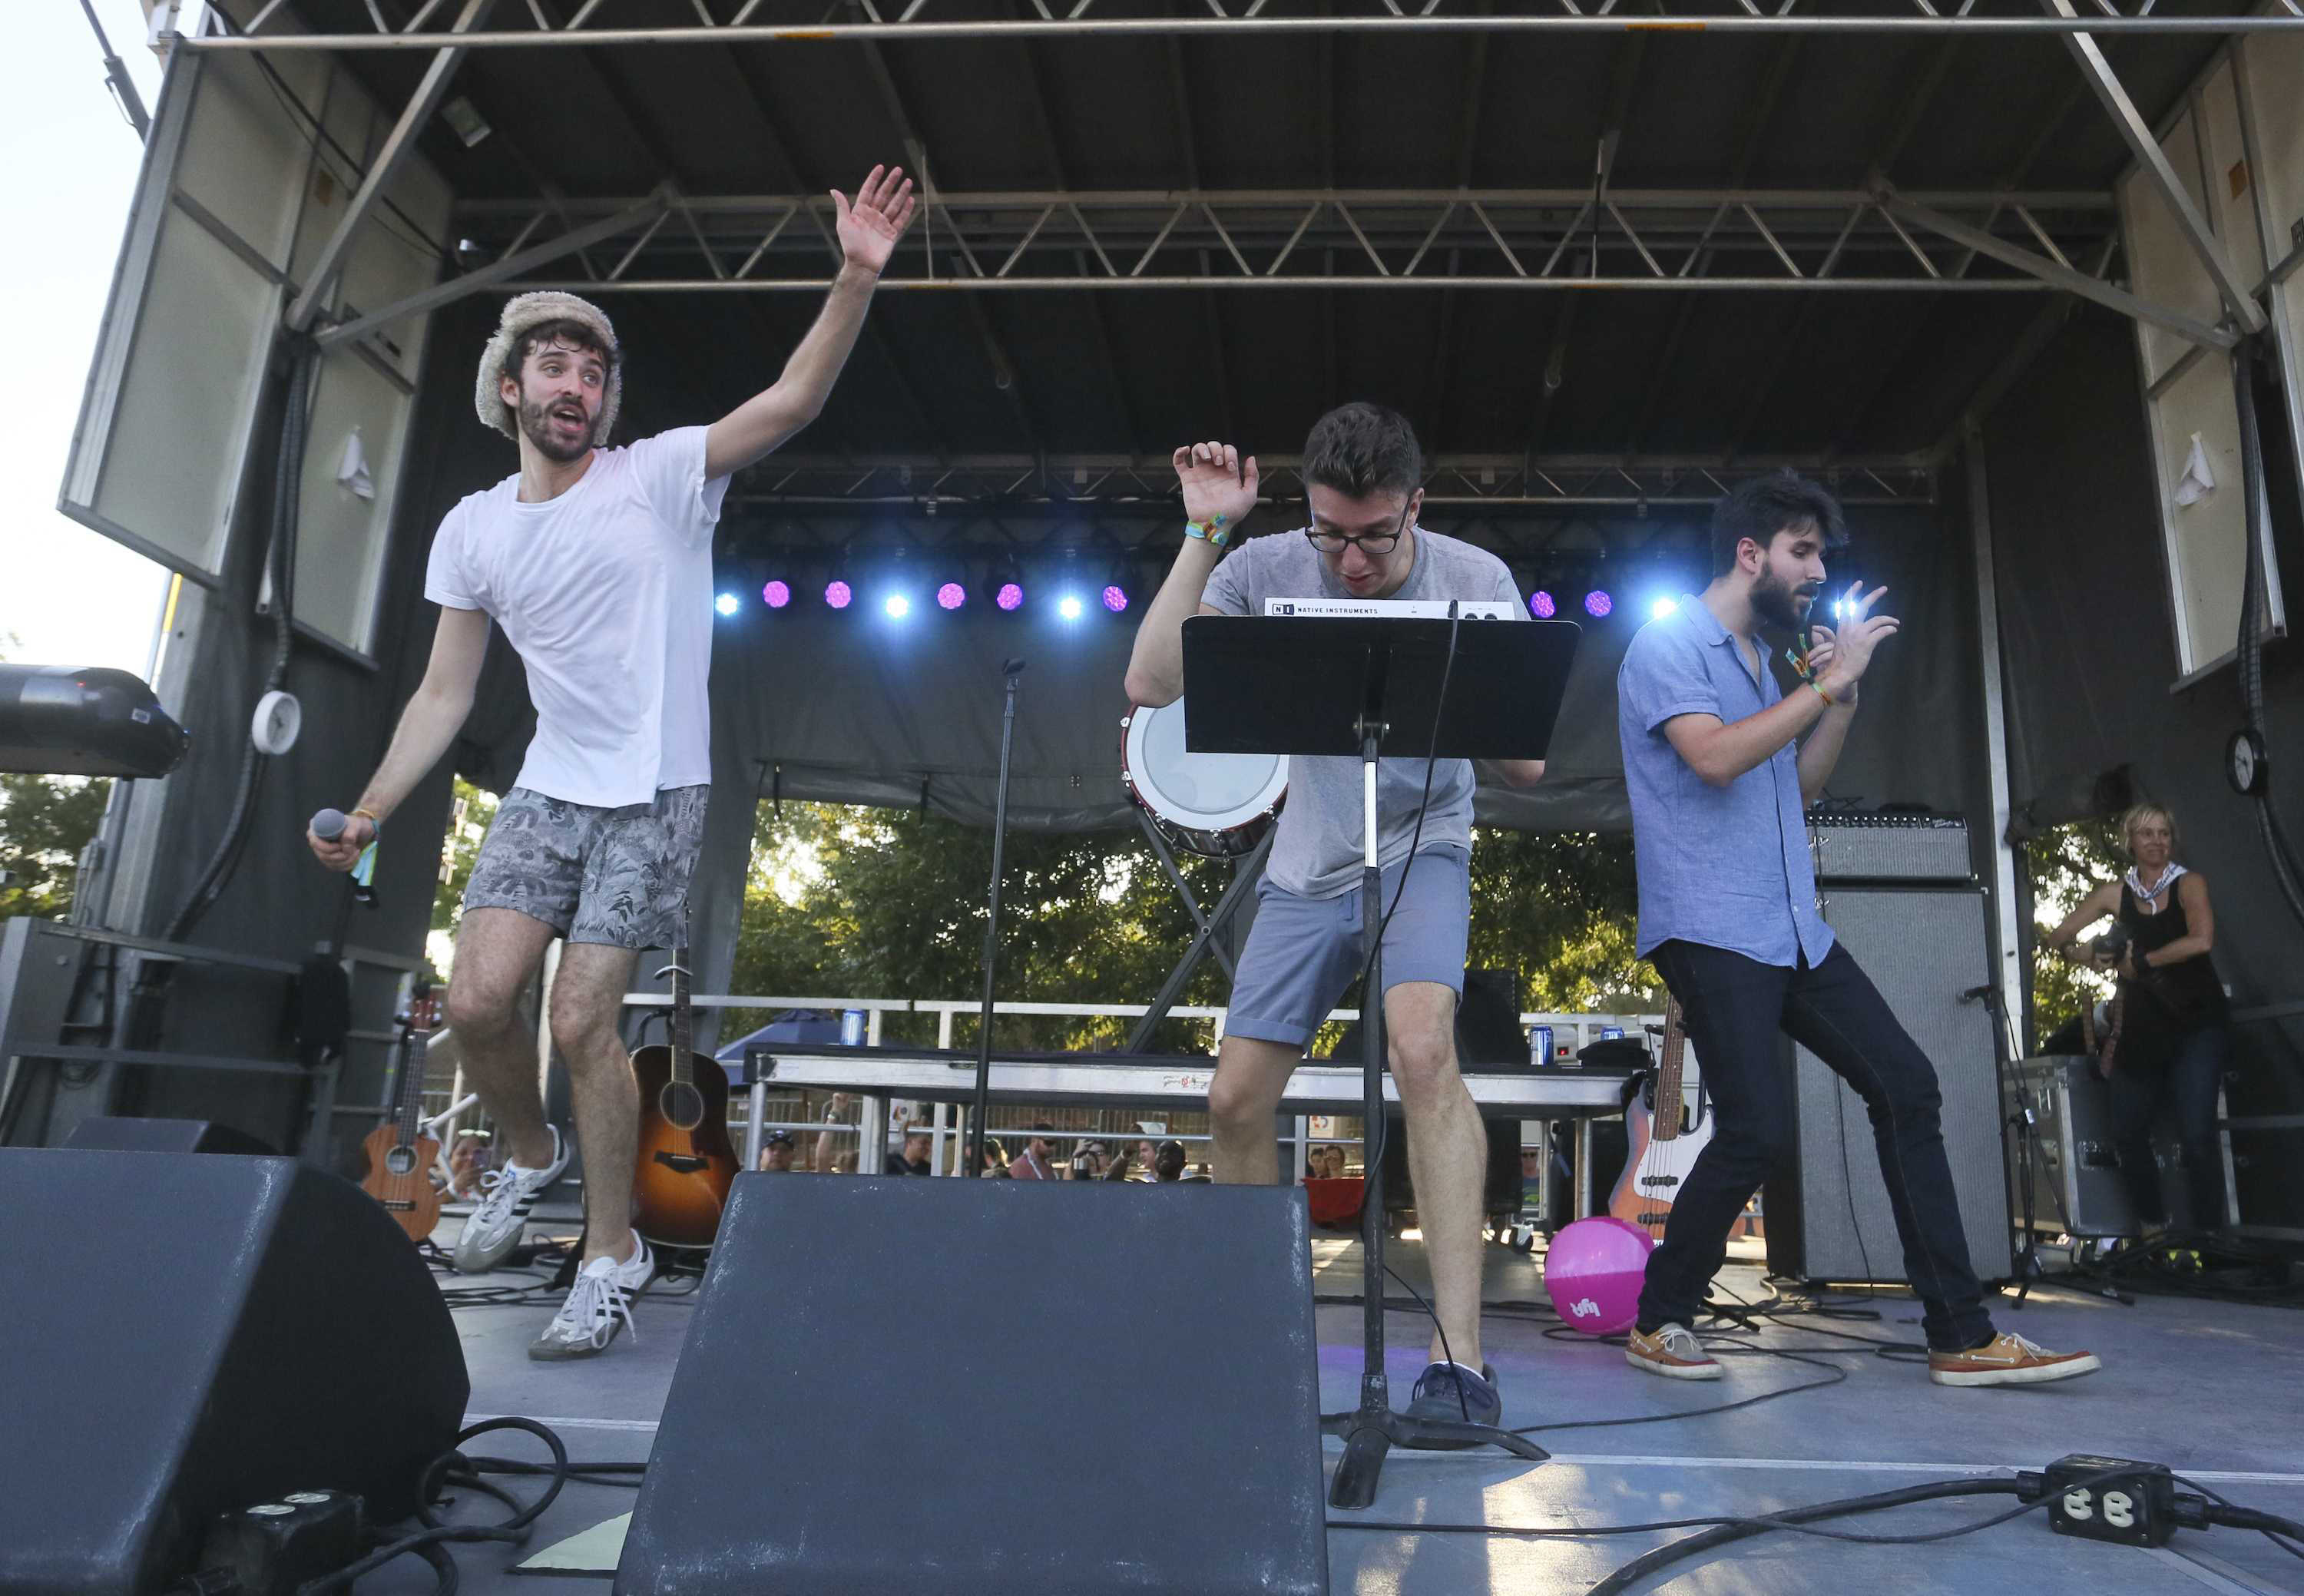 After Summerfest cancellations, AJR announces their father has died